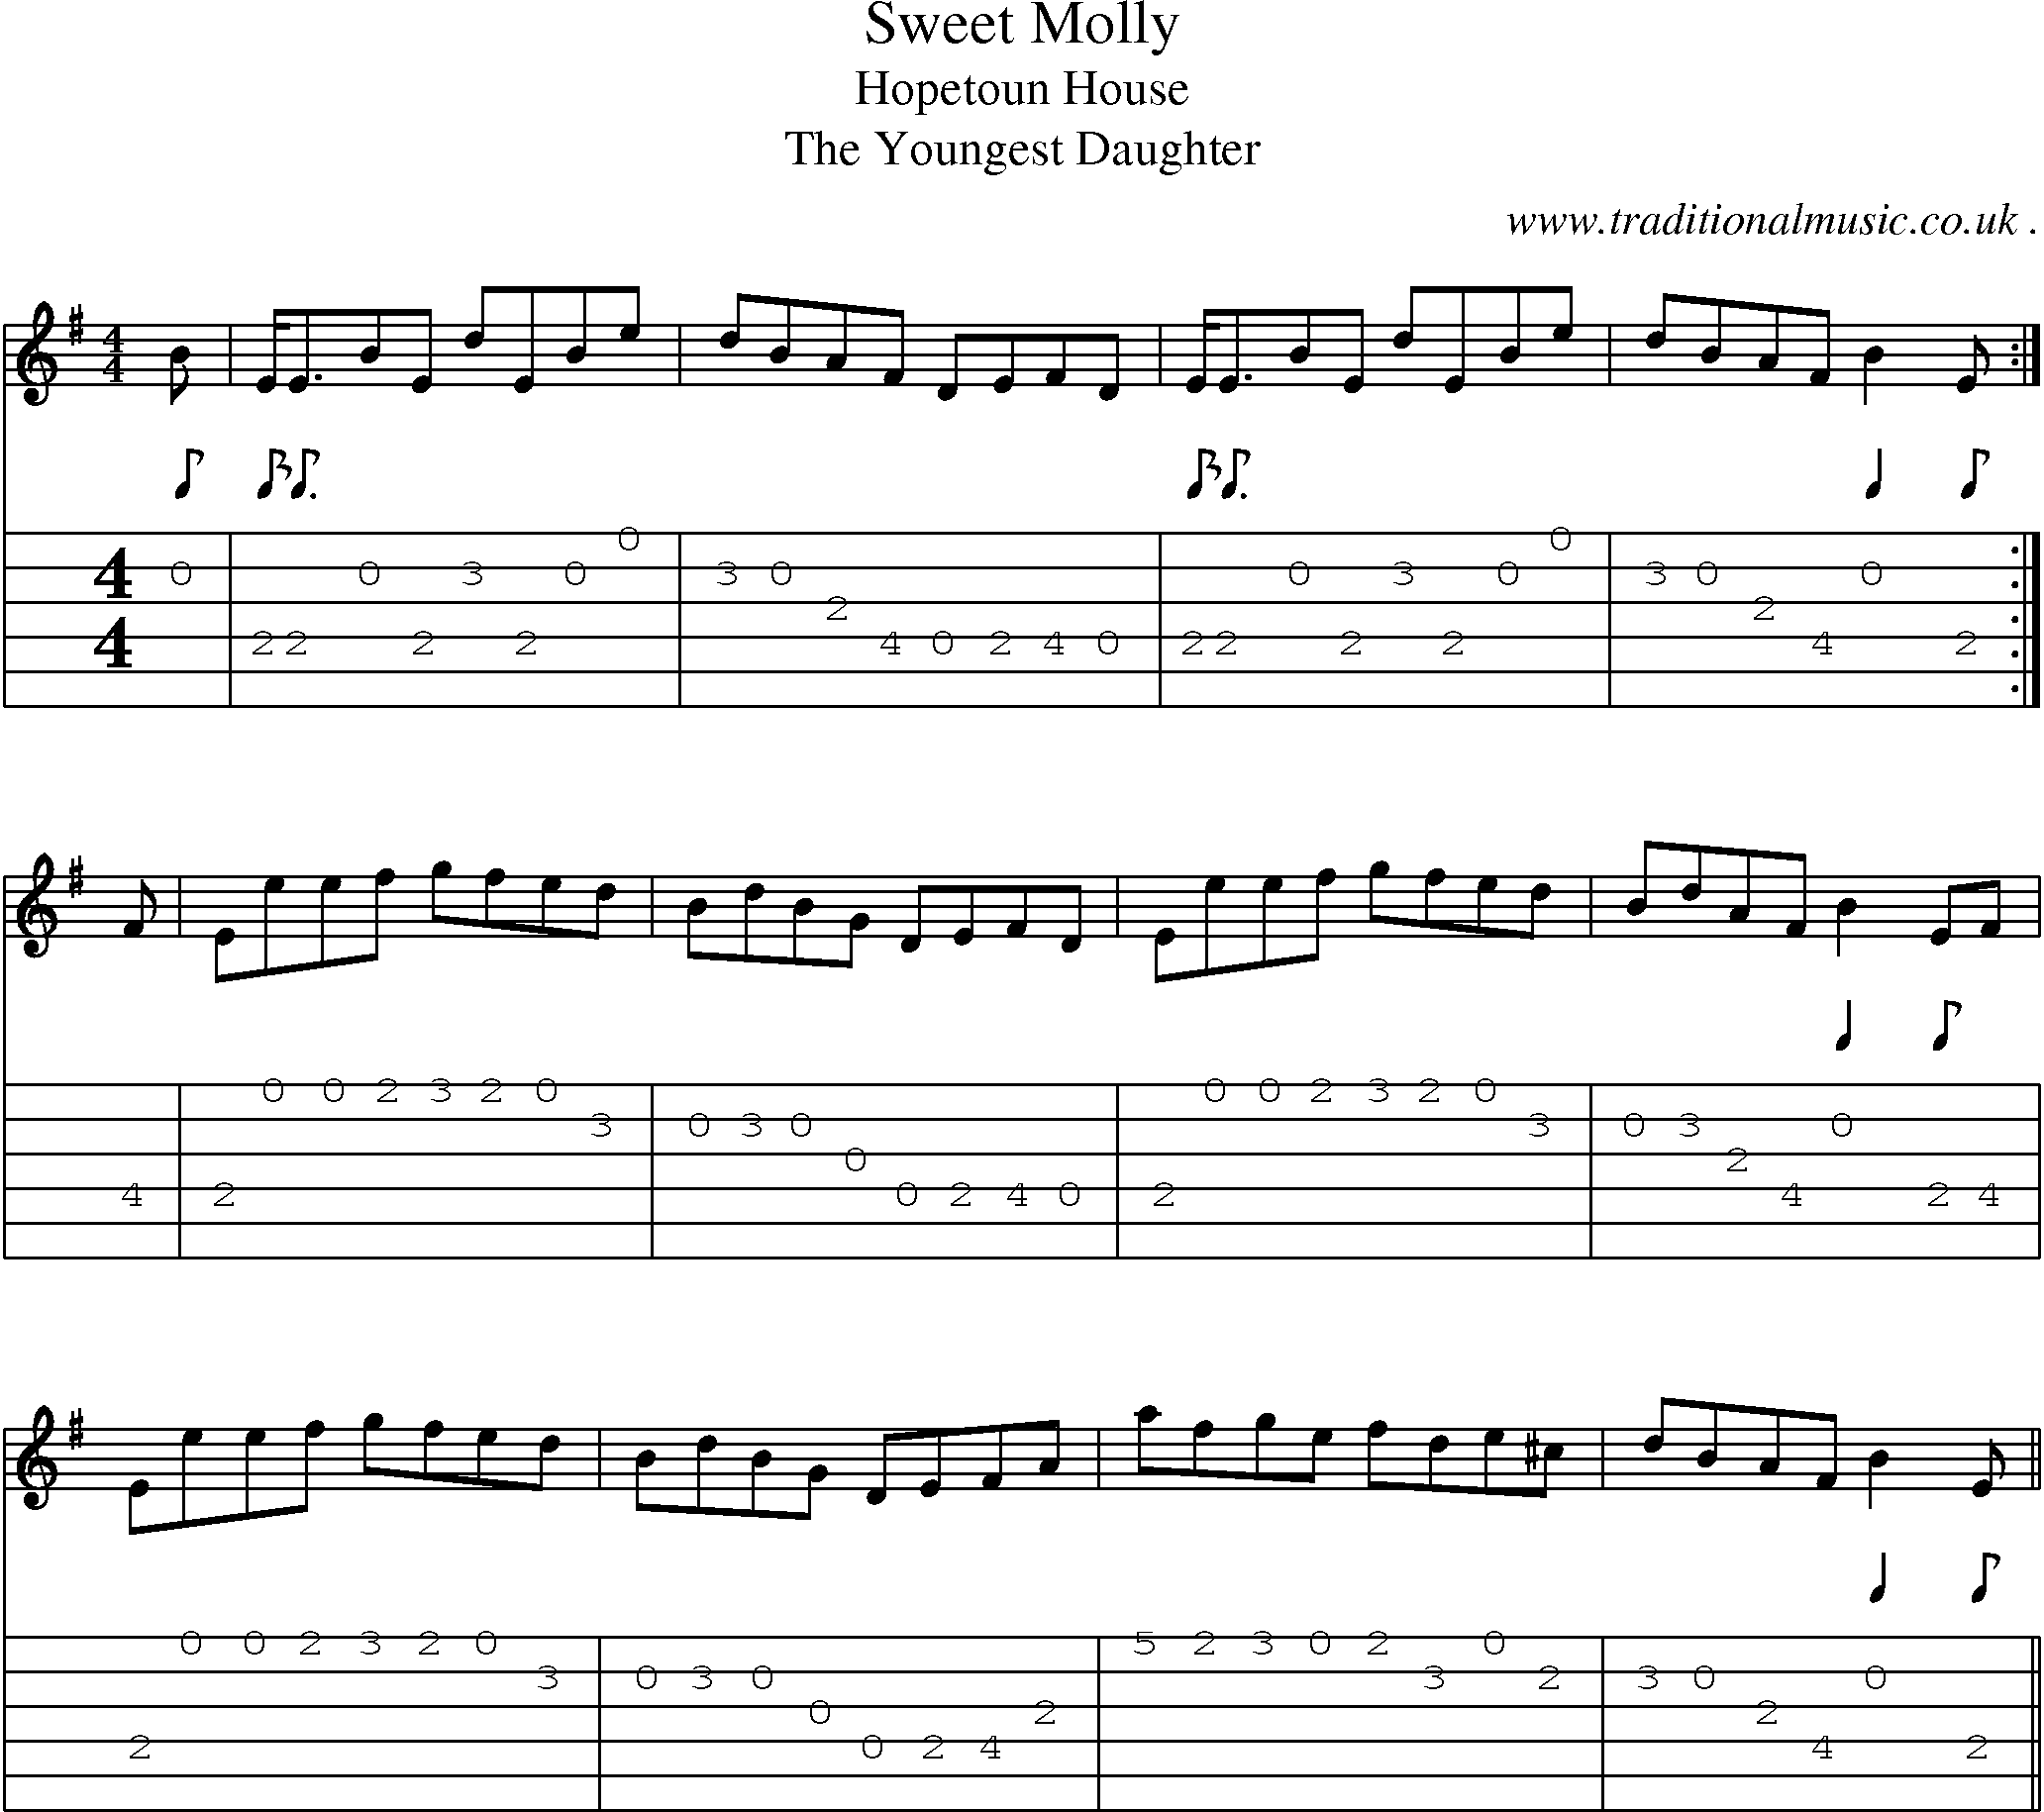 Sheet-music  score, Chords and Guitar Tabs for Sweet Molly